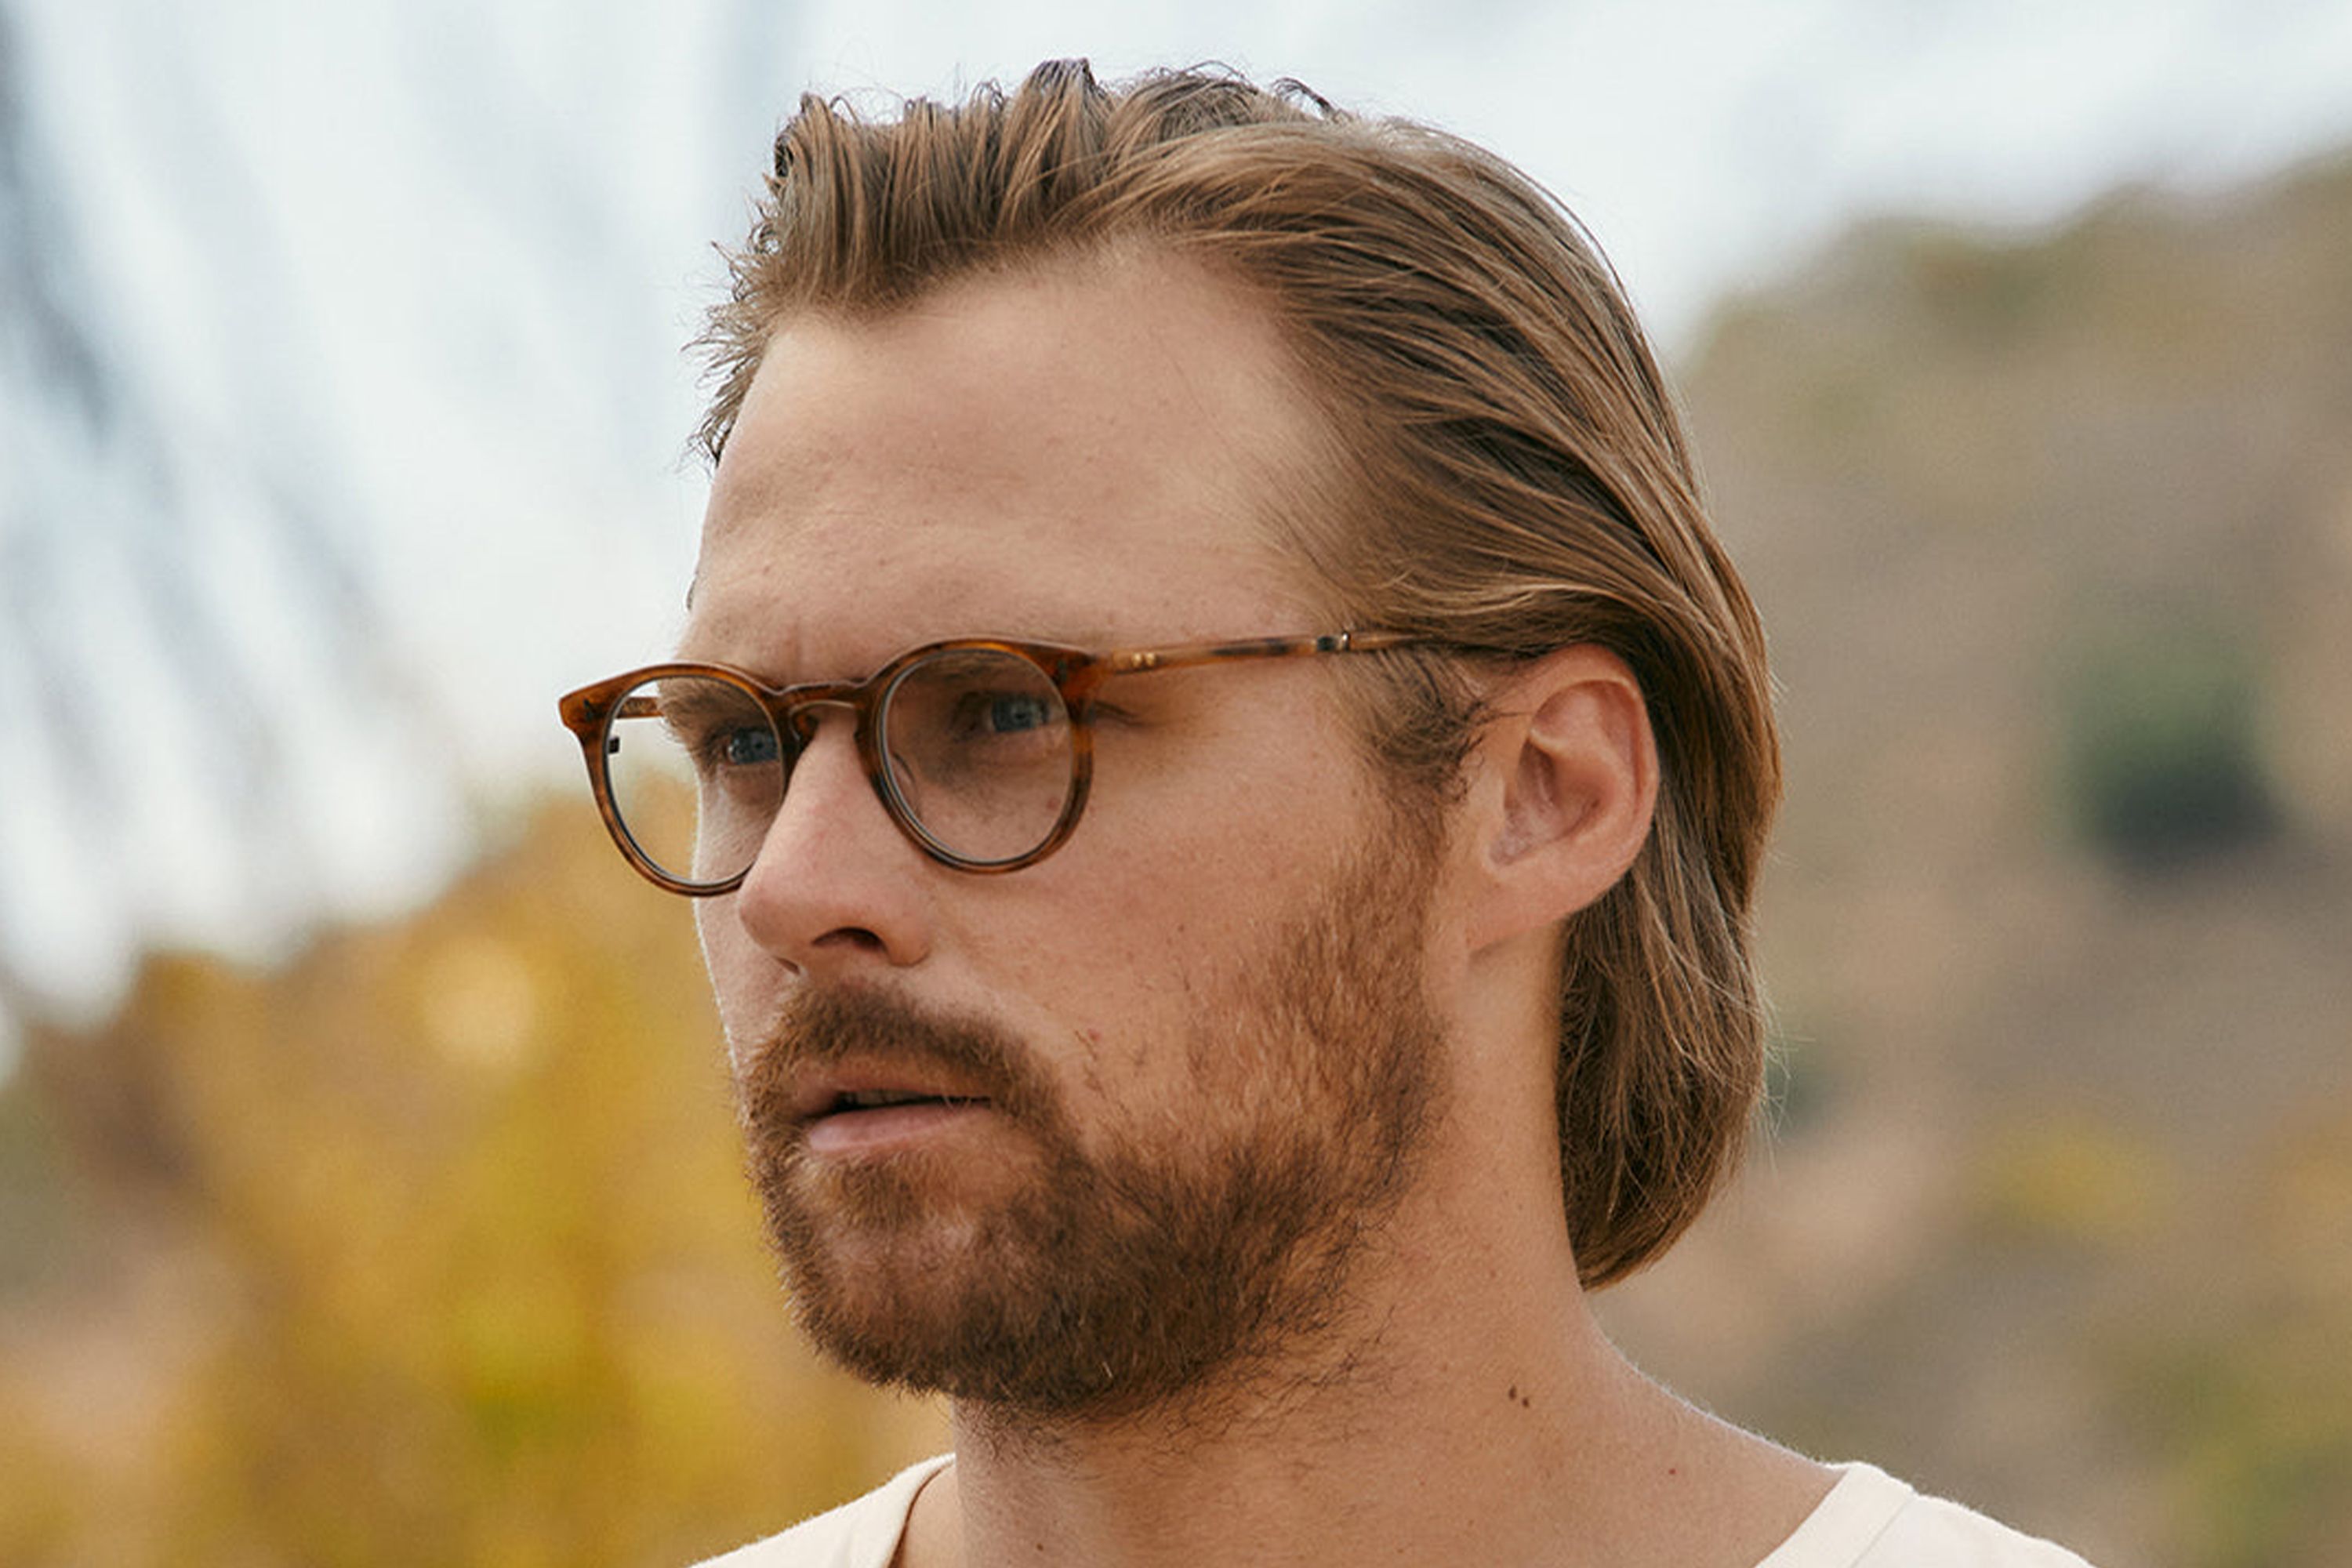 The Best Eyeglass Brands for Men: Every Budget, Strength and Style